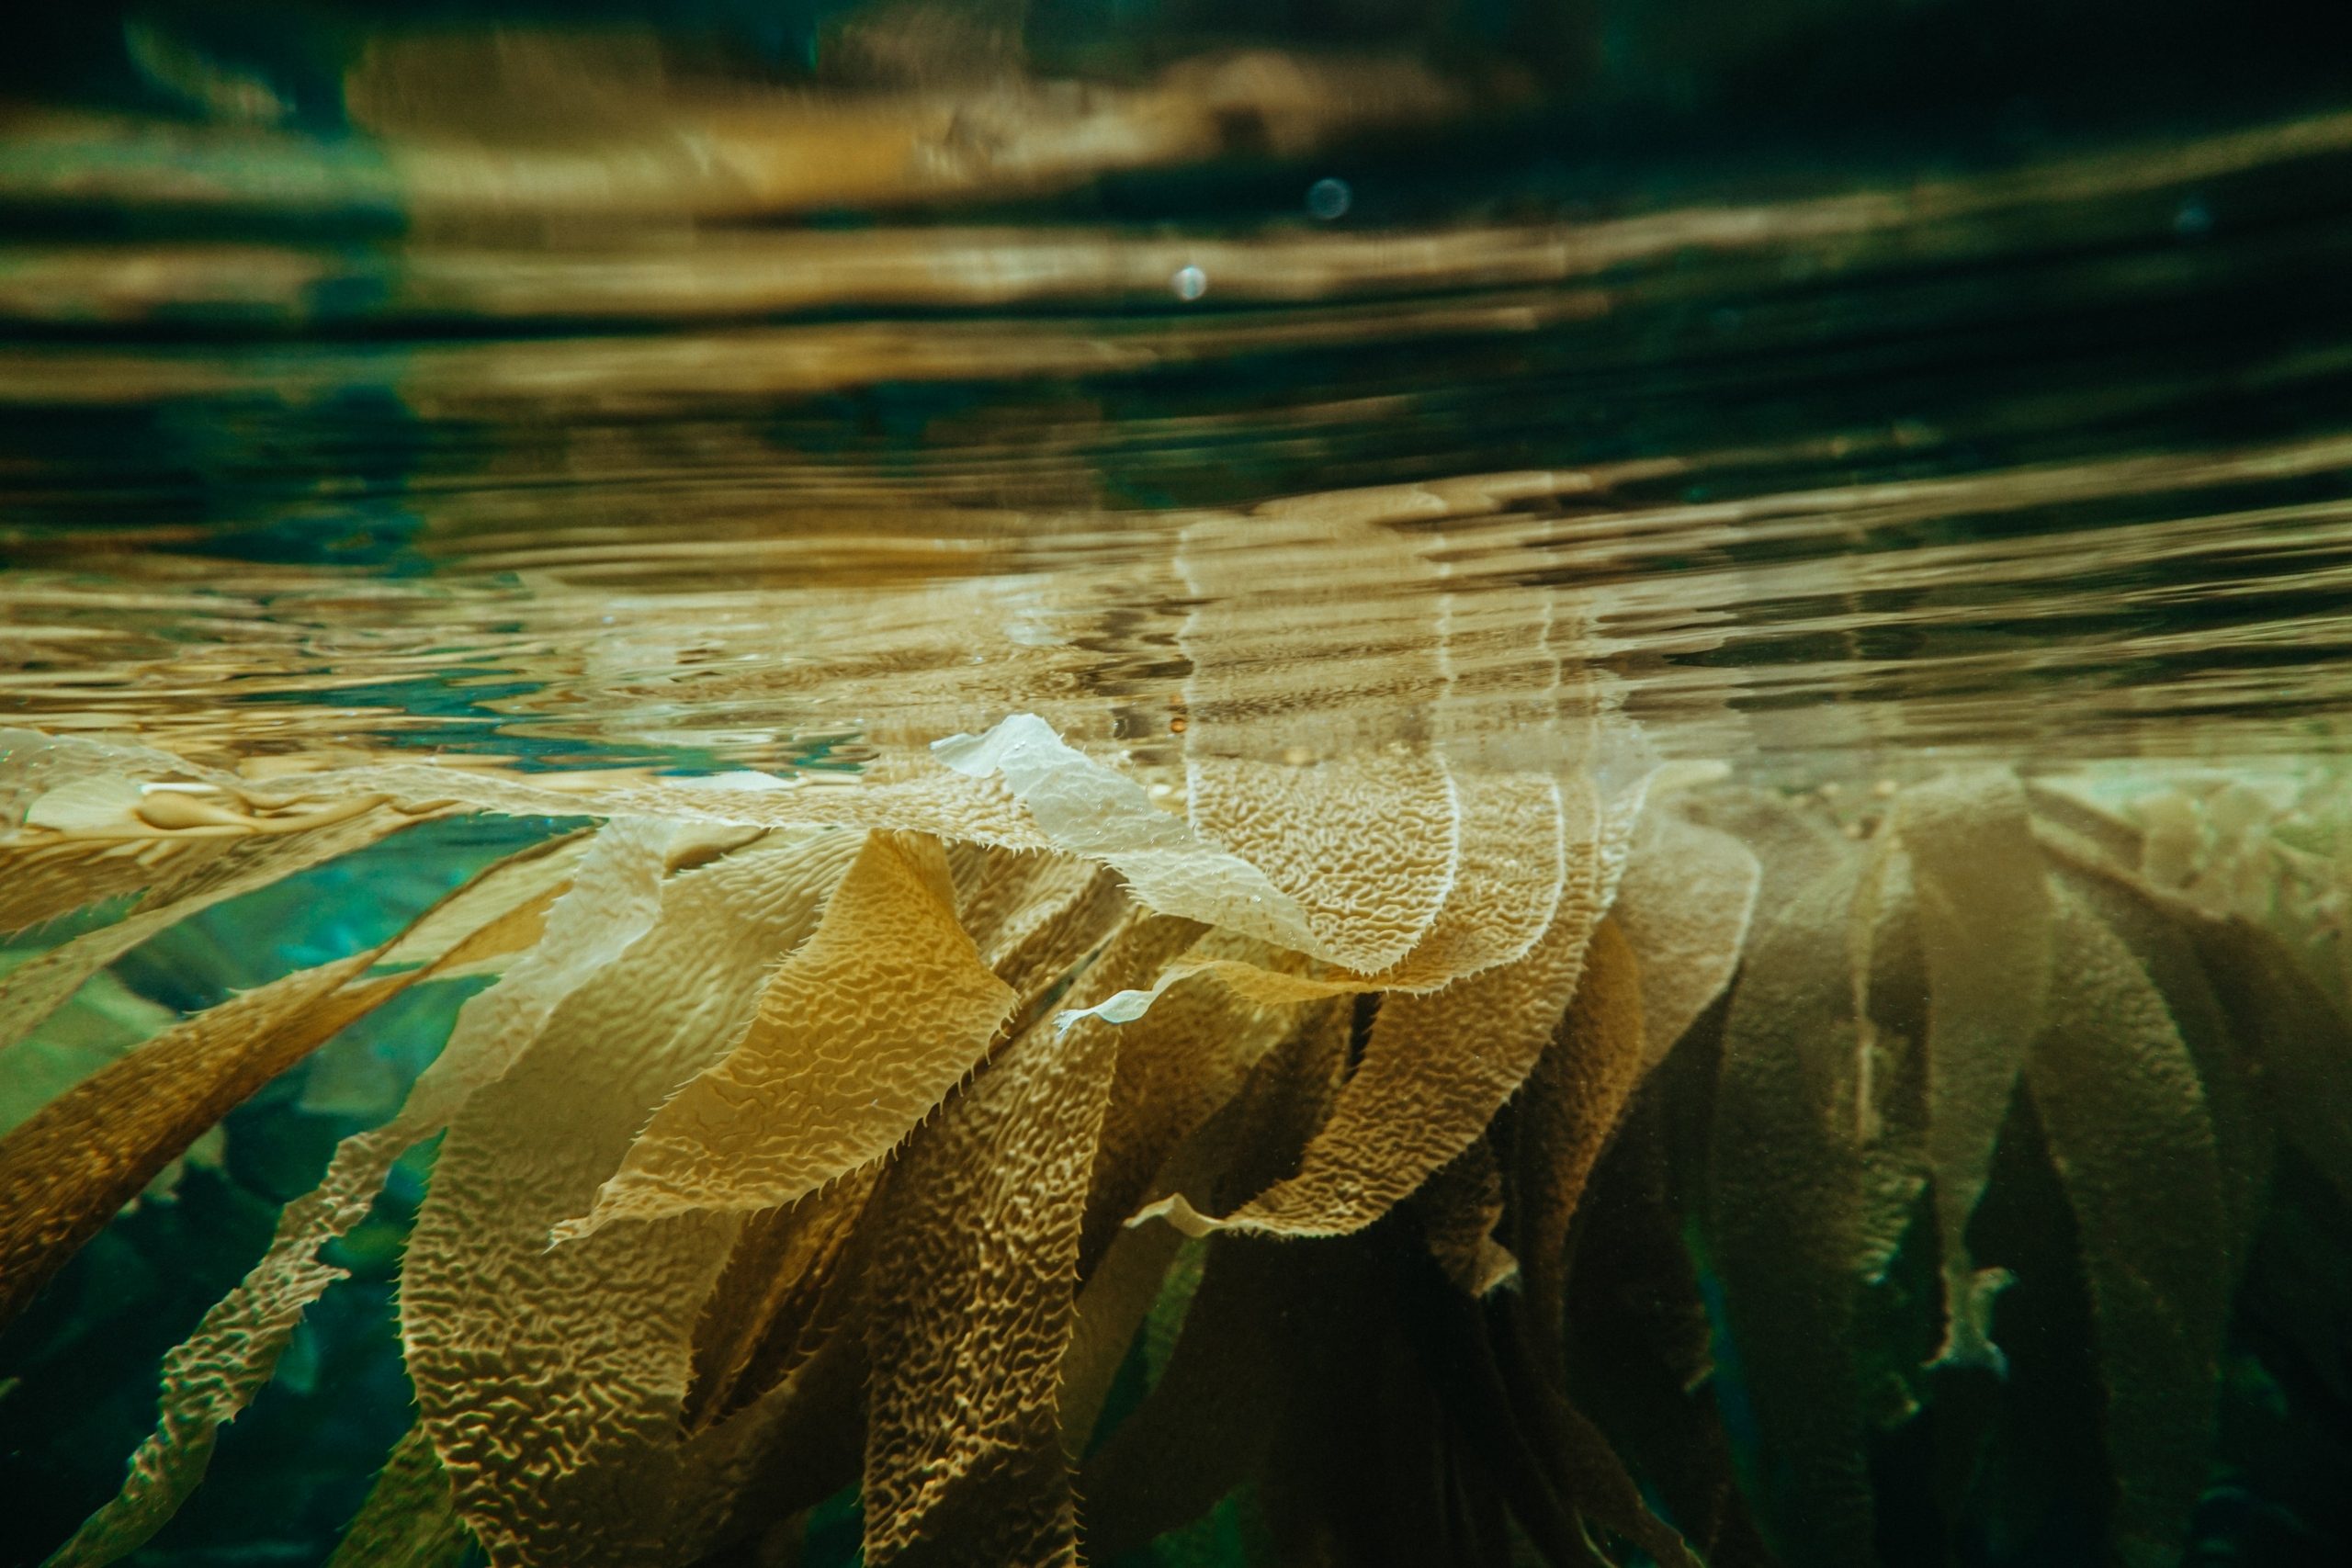 Several dozen blades of kelp seaweed seen from underneath as they float beneath the surface of clear, rippling water